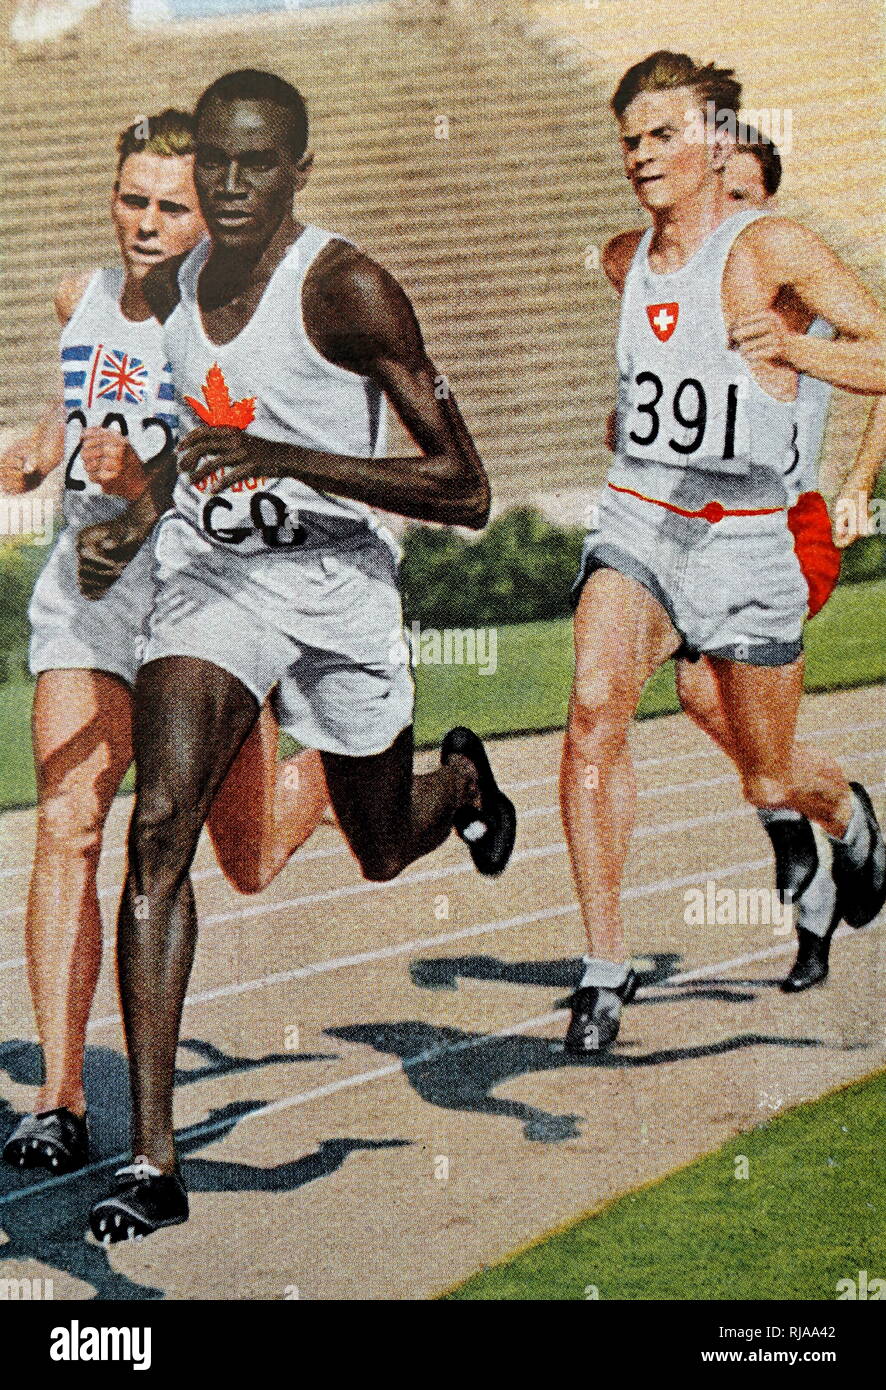 Photograph of Phil Edwards (1907-1971) in the 800 meter race in the 1932 Olympic games. Edwards competed in the 1932 Summer Olympics in Los Angeles and in the 1936 Summer Olympics in Berlin, where he was one of a number of black athletes, to compete before the Hitler regime. Phil's nickname was 'Man of Bronze' due to the amount of bronze medals he had won over his career. Stock Photo